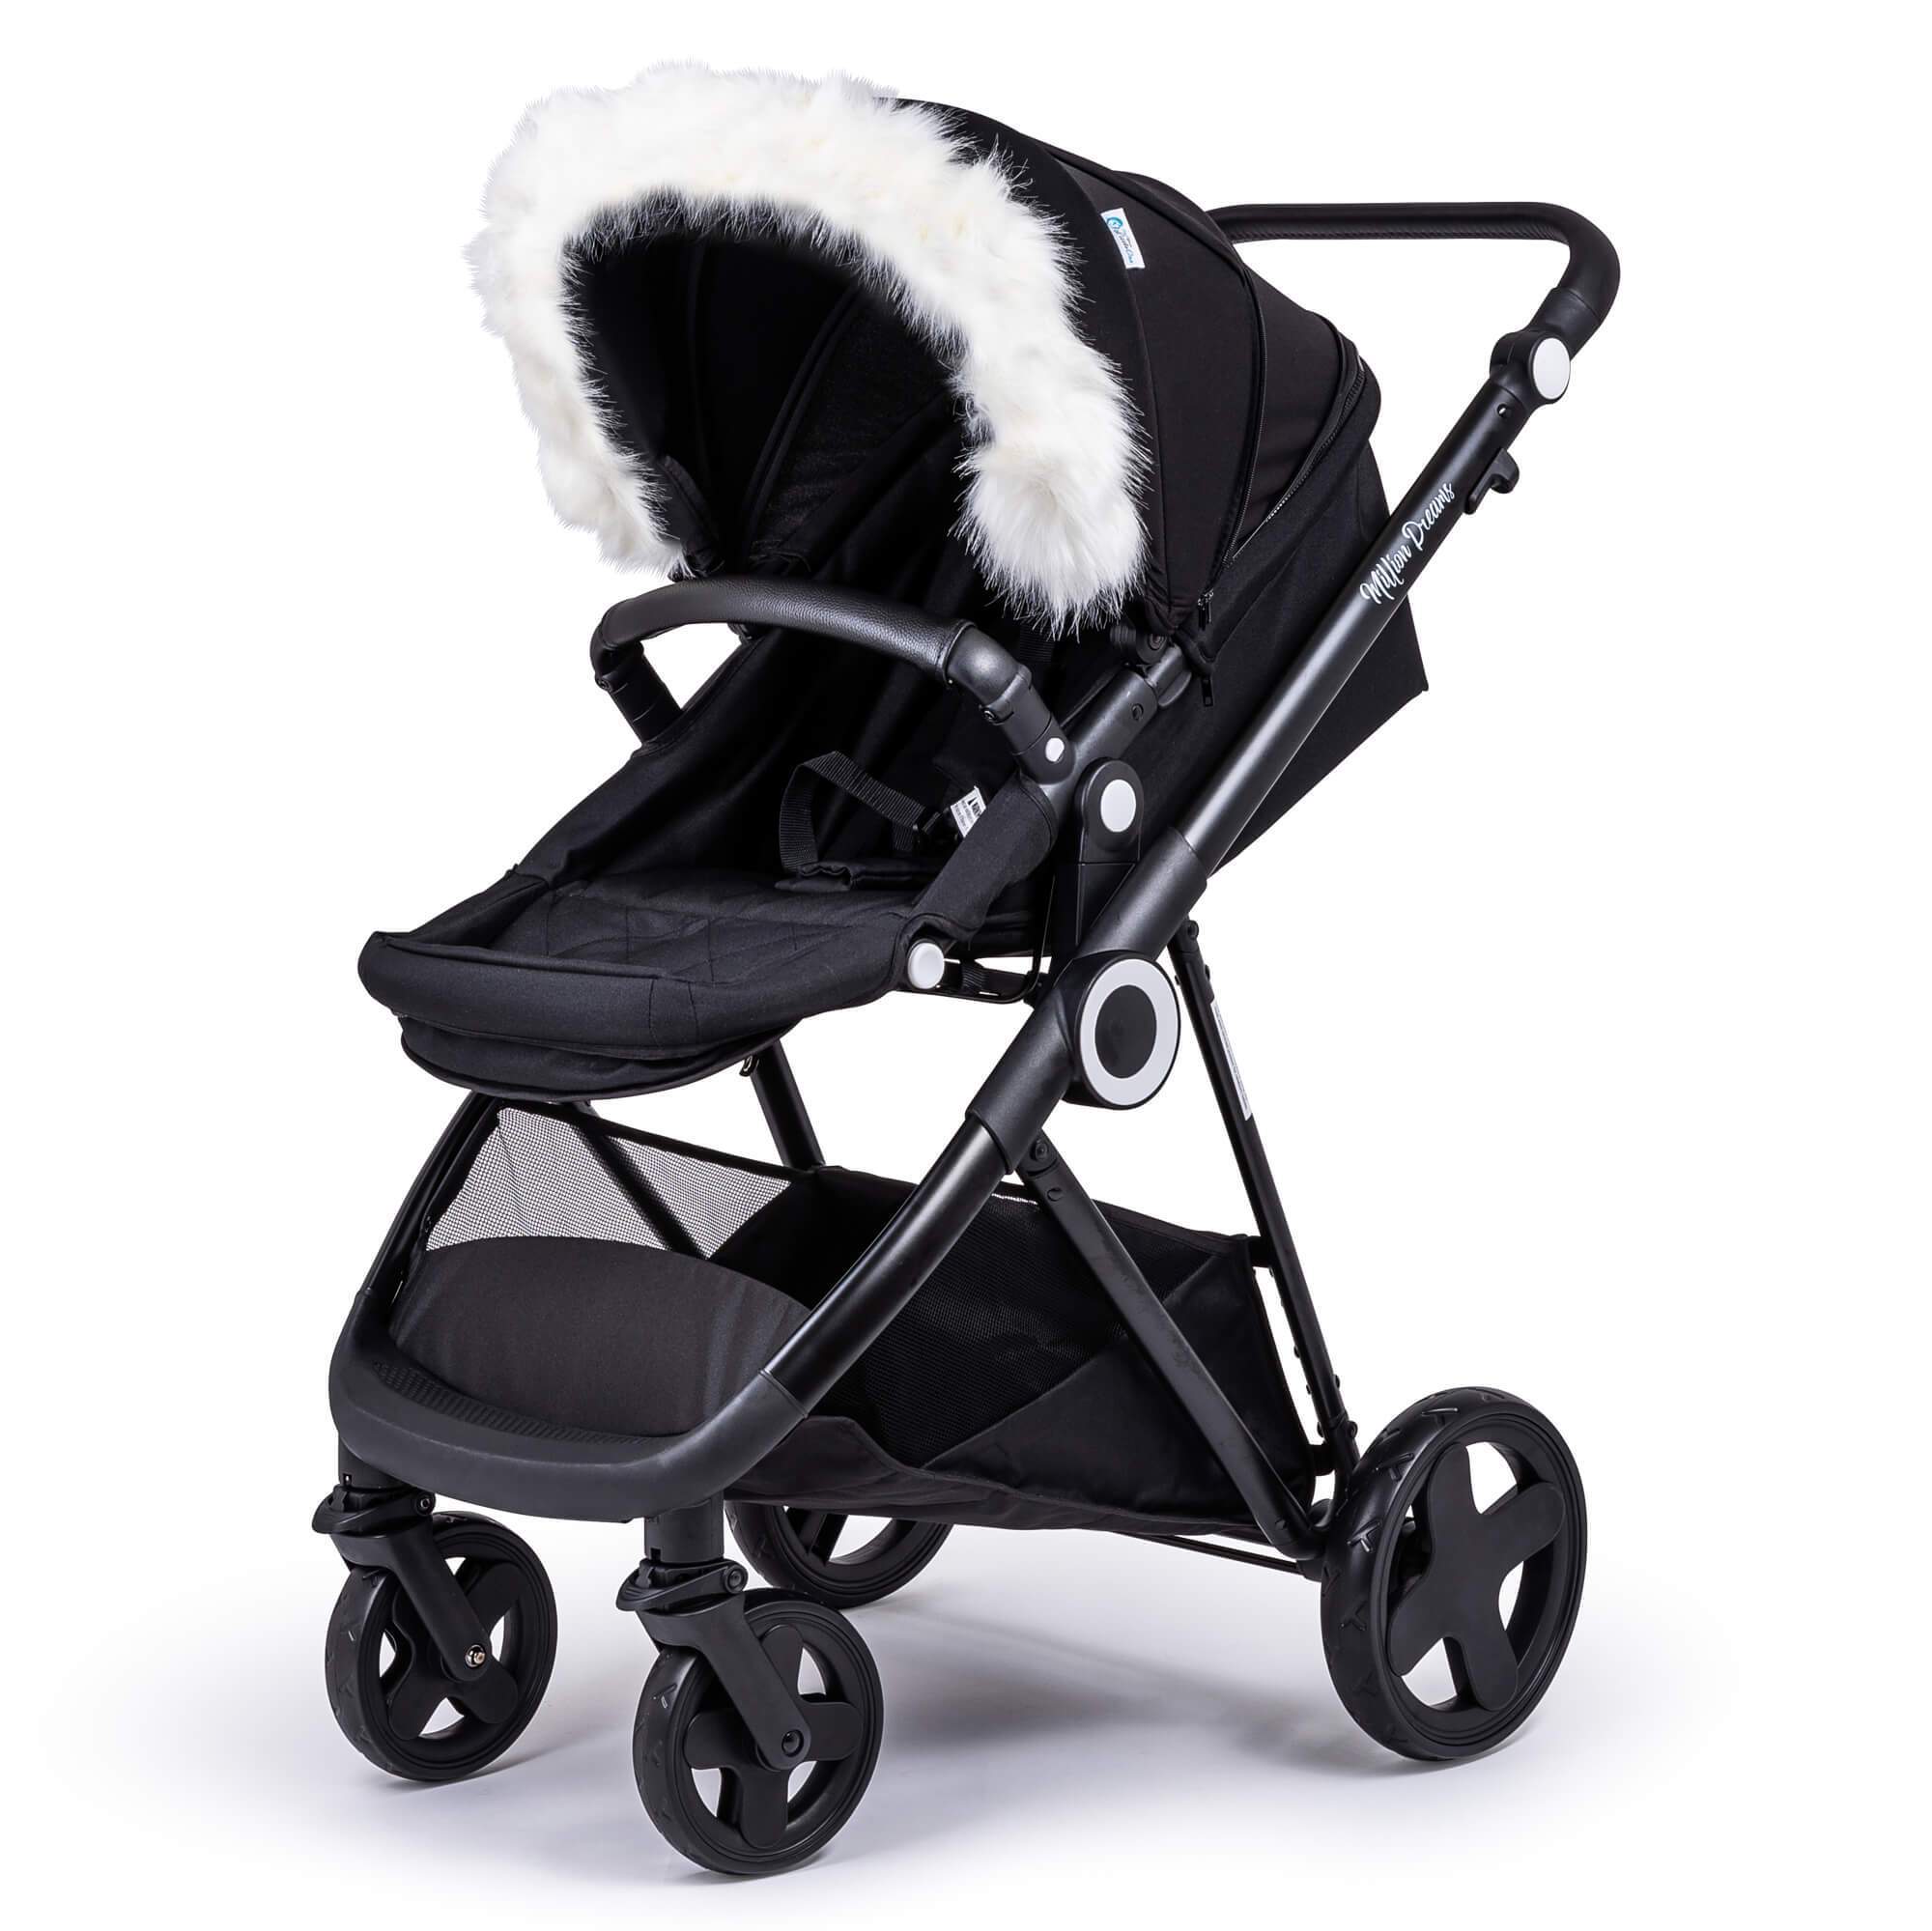 Pram Fur Hood Trim Attachment for Pushchair Compatible with Babybus - For Your Little One